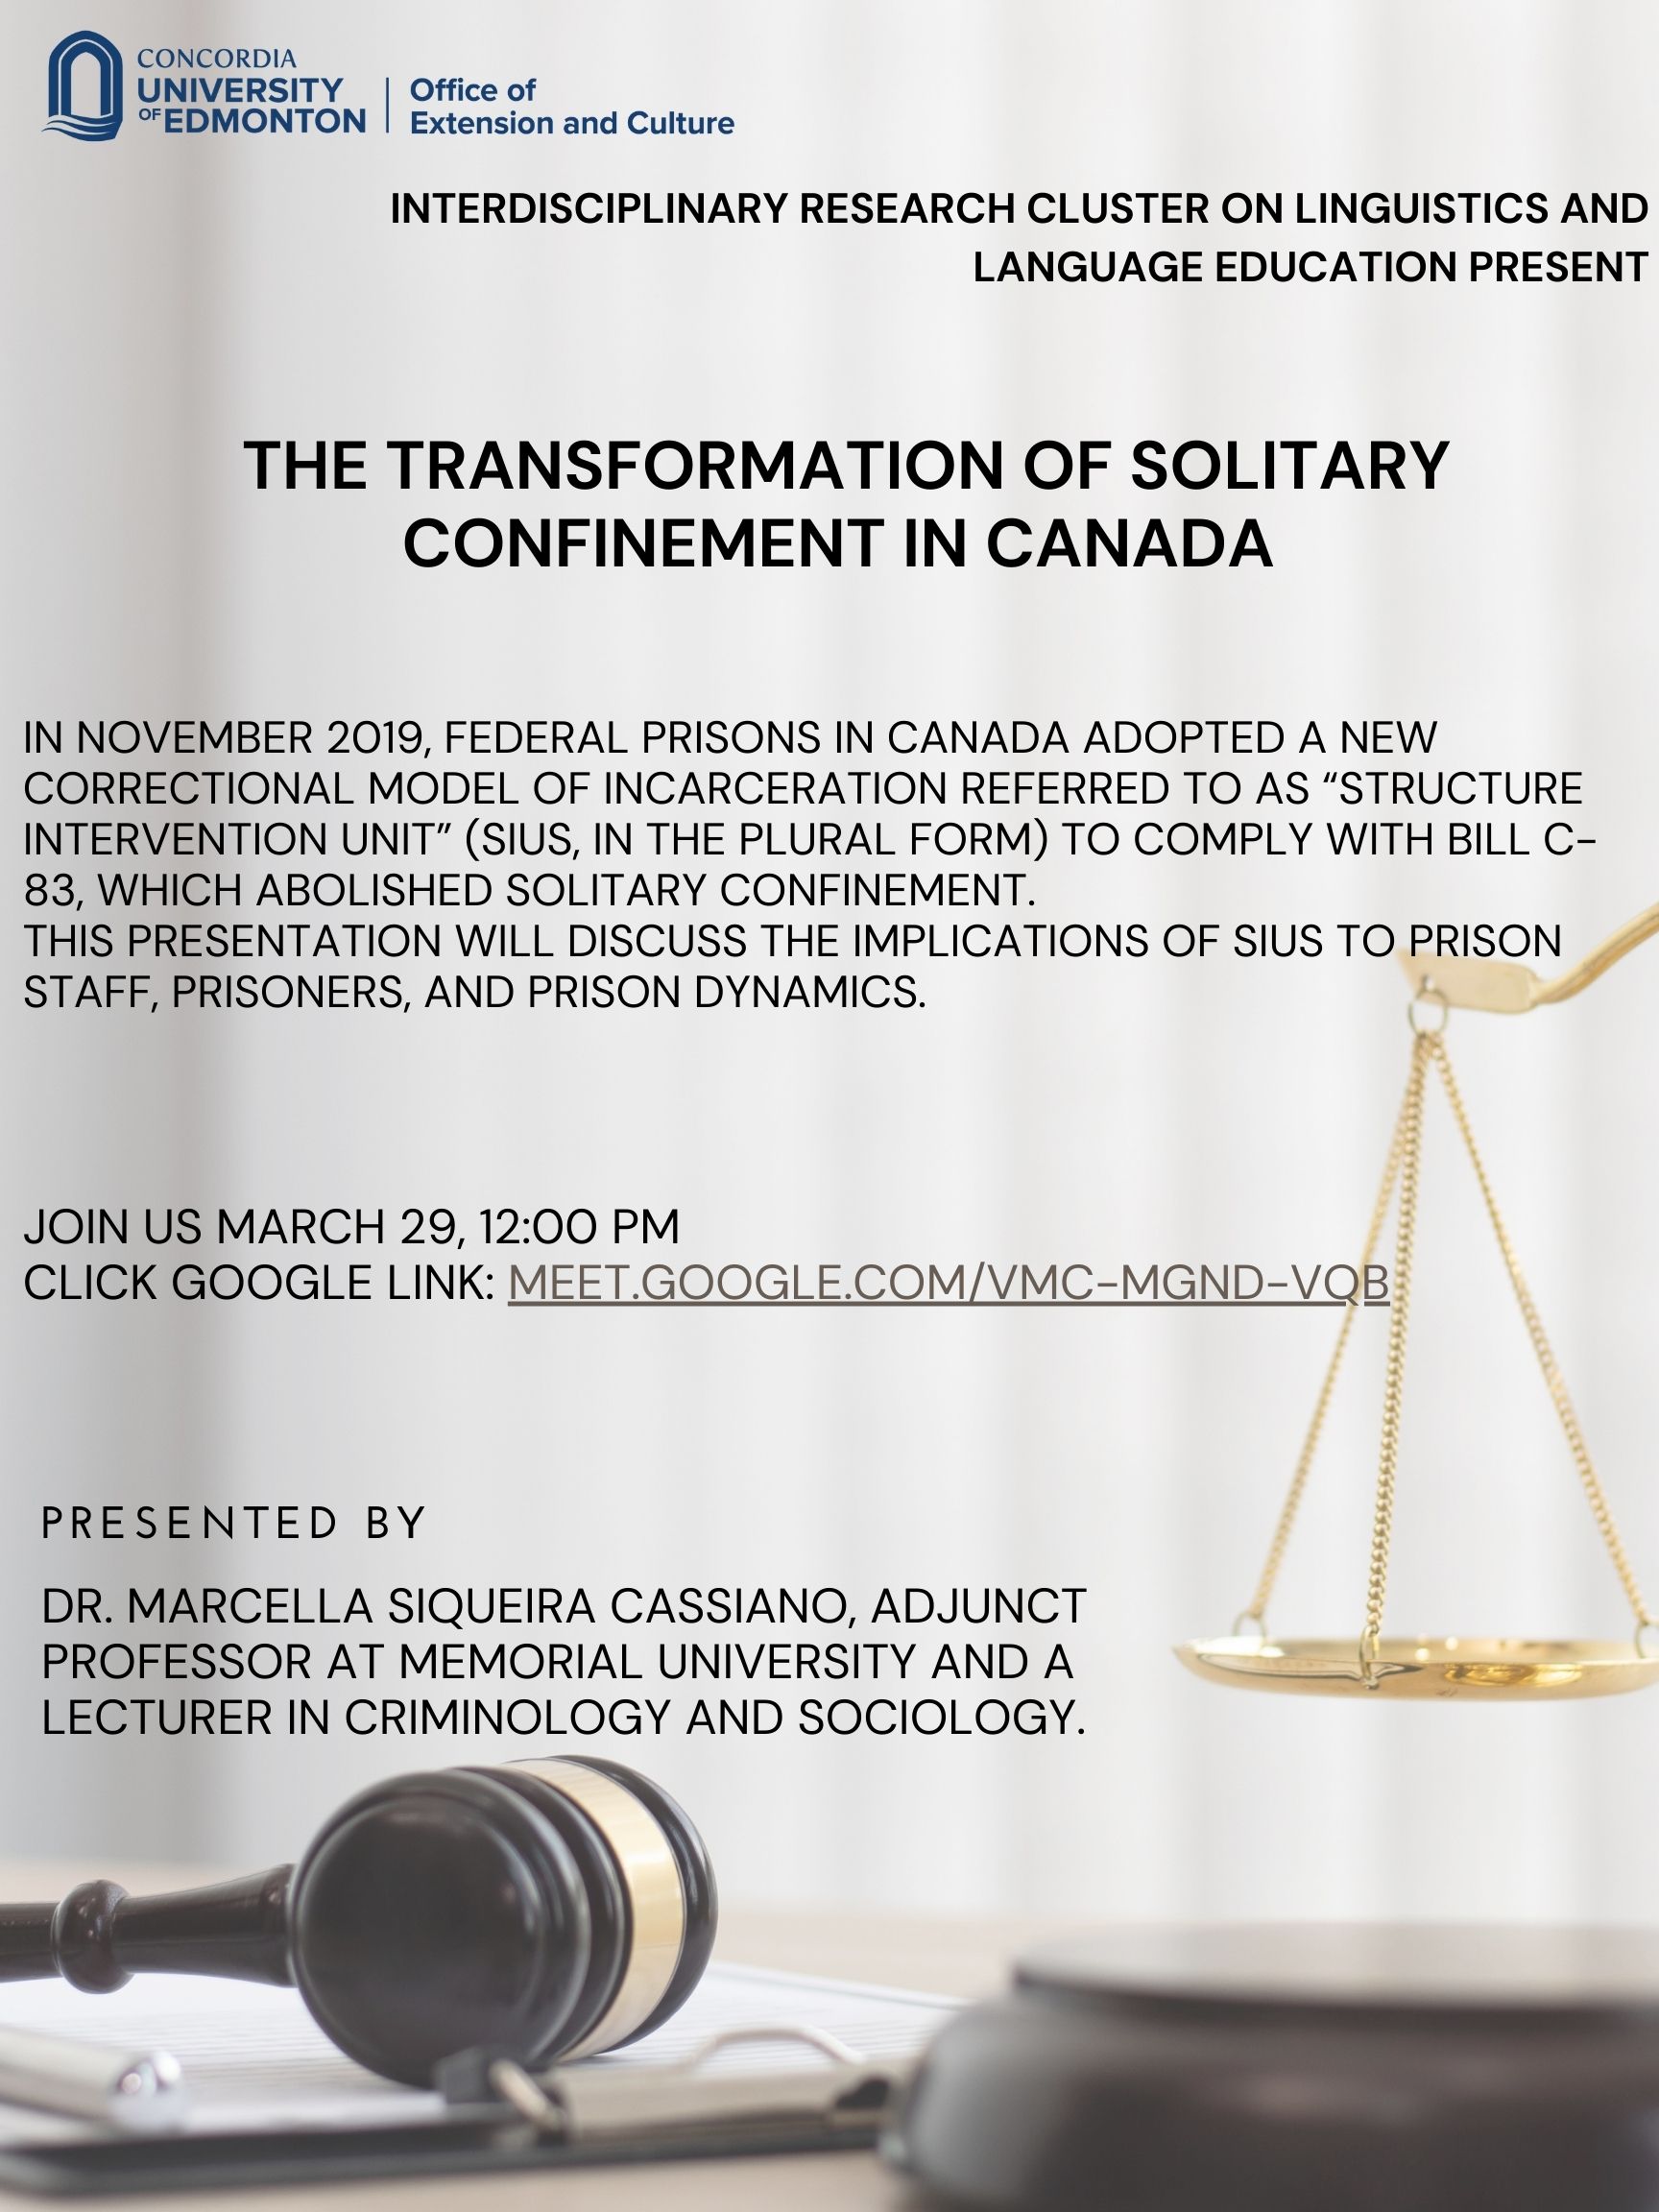 Upcoming Research Presentation: The Transformation of Solitary Confinement in Canada